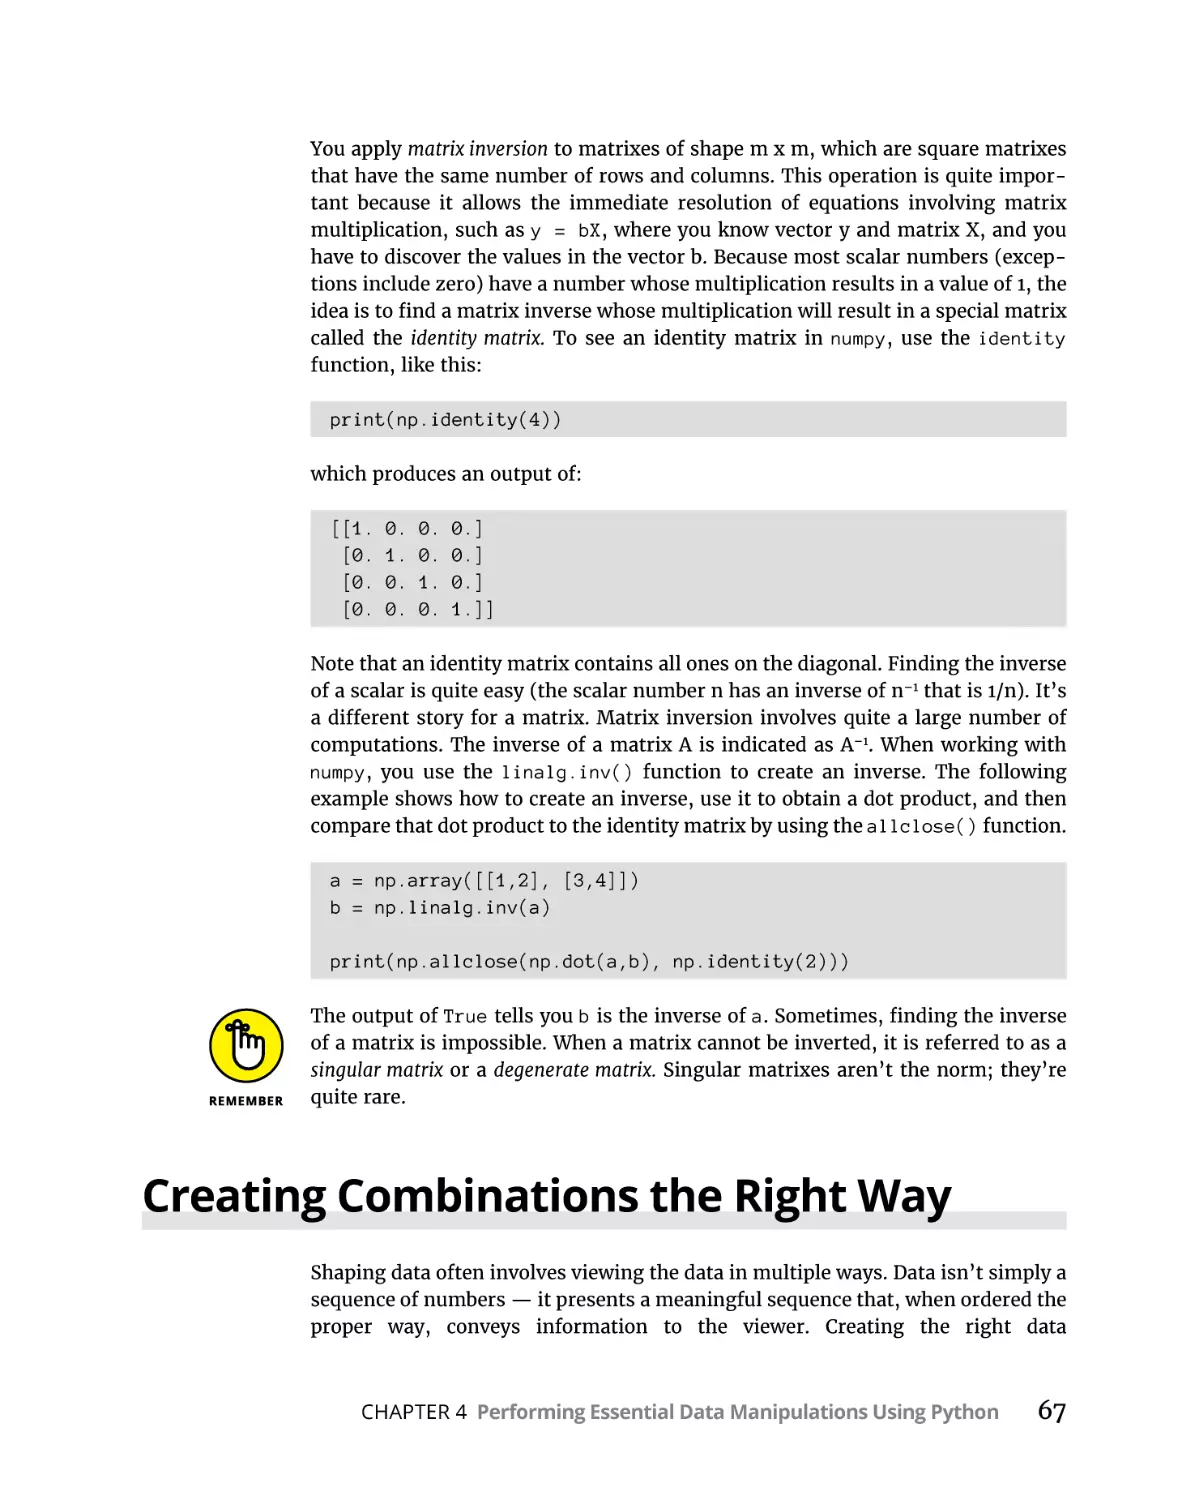 Creating Combinations the Right Way